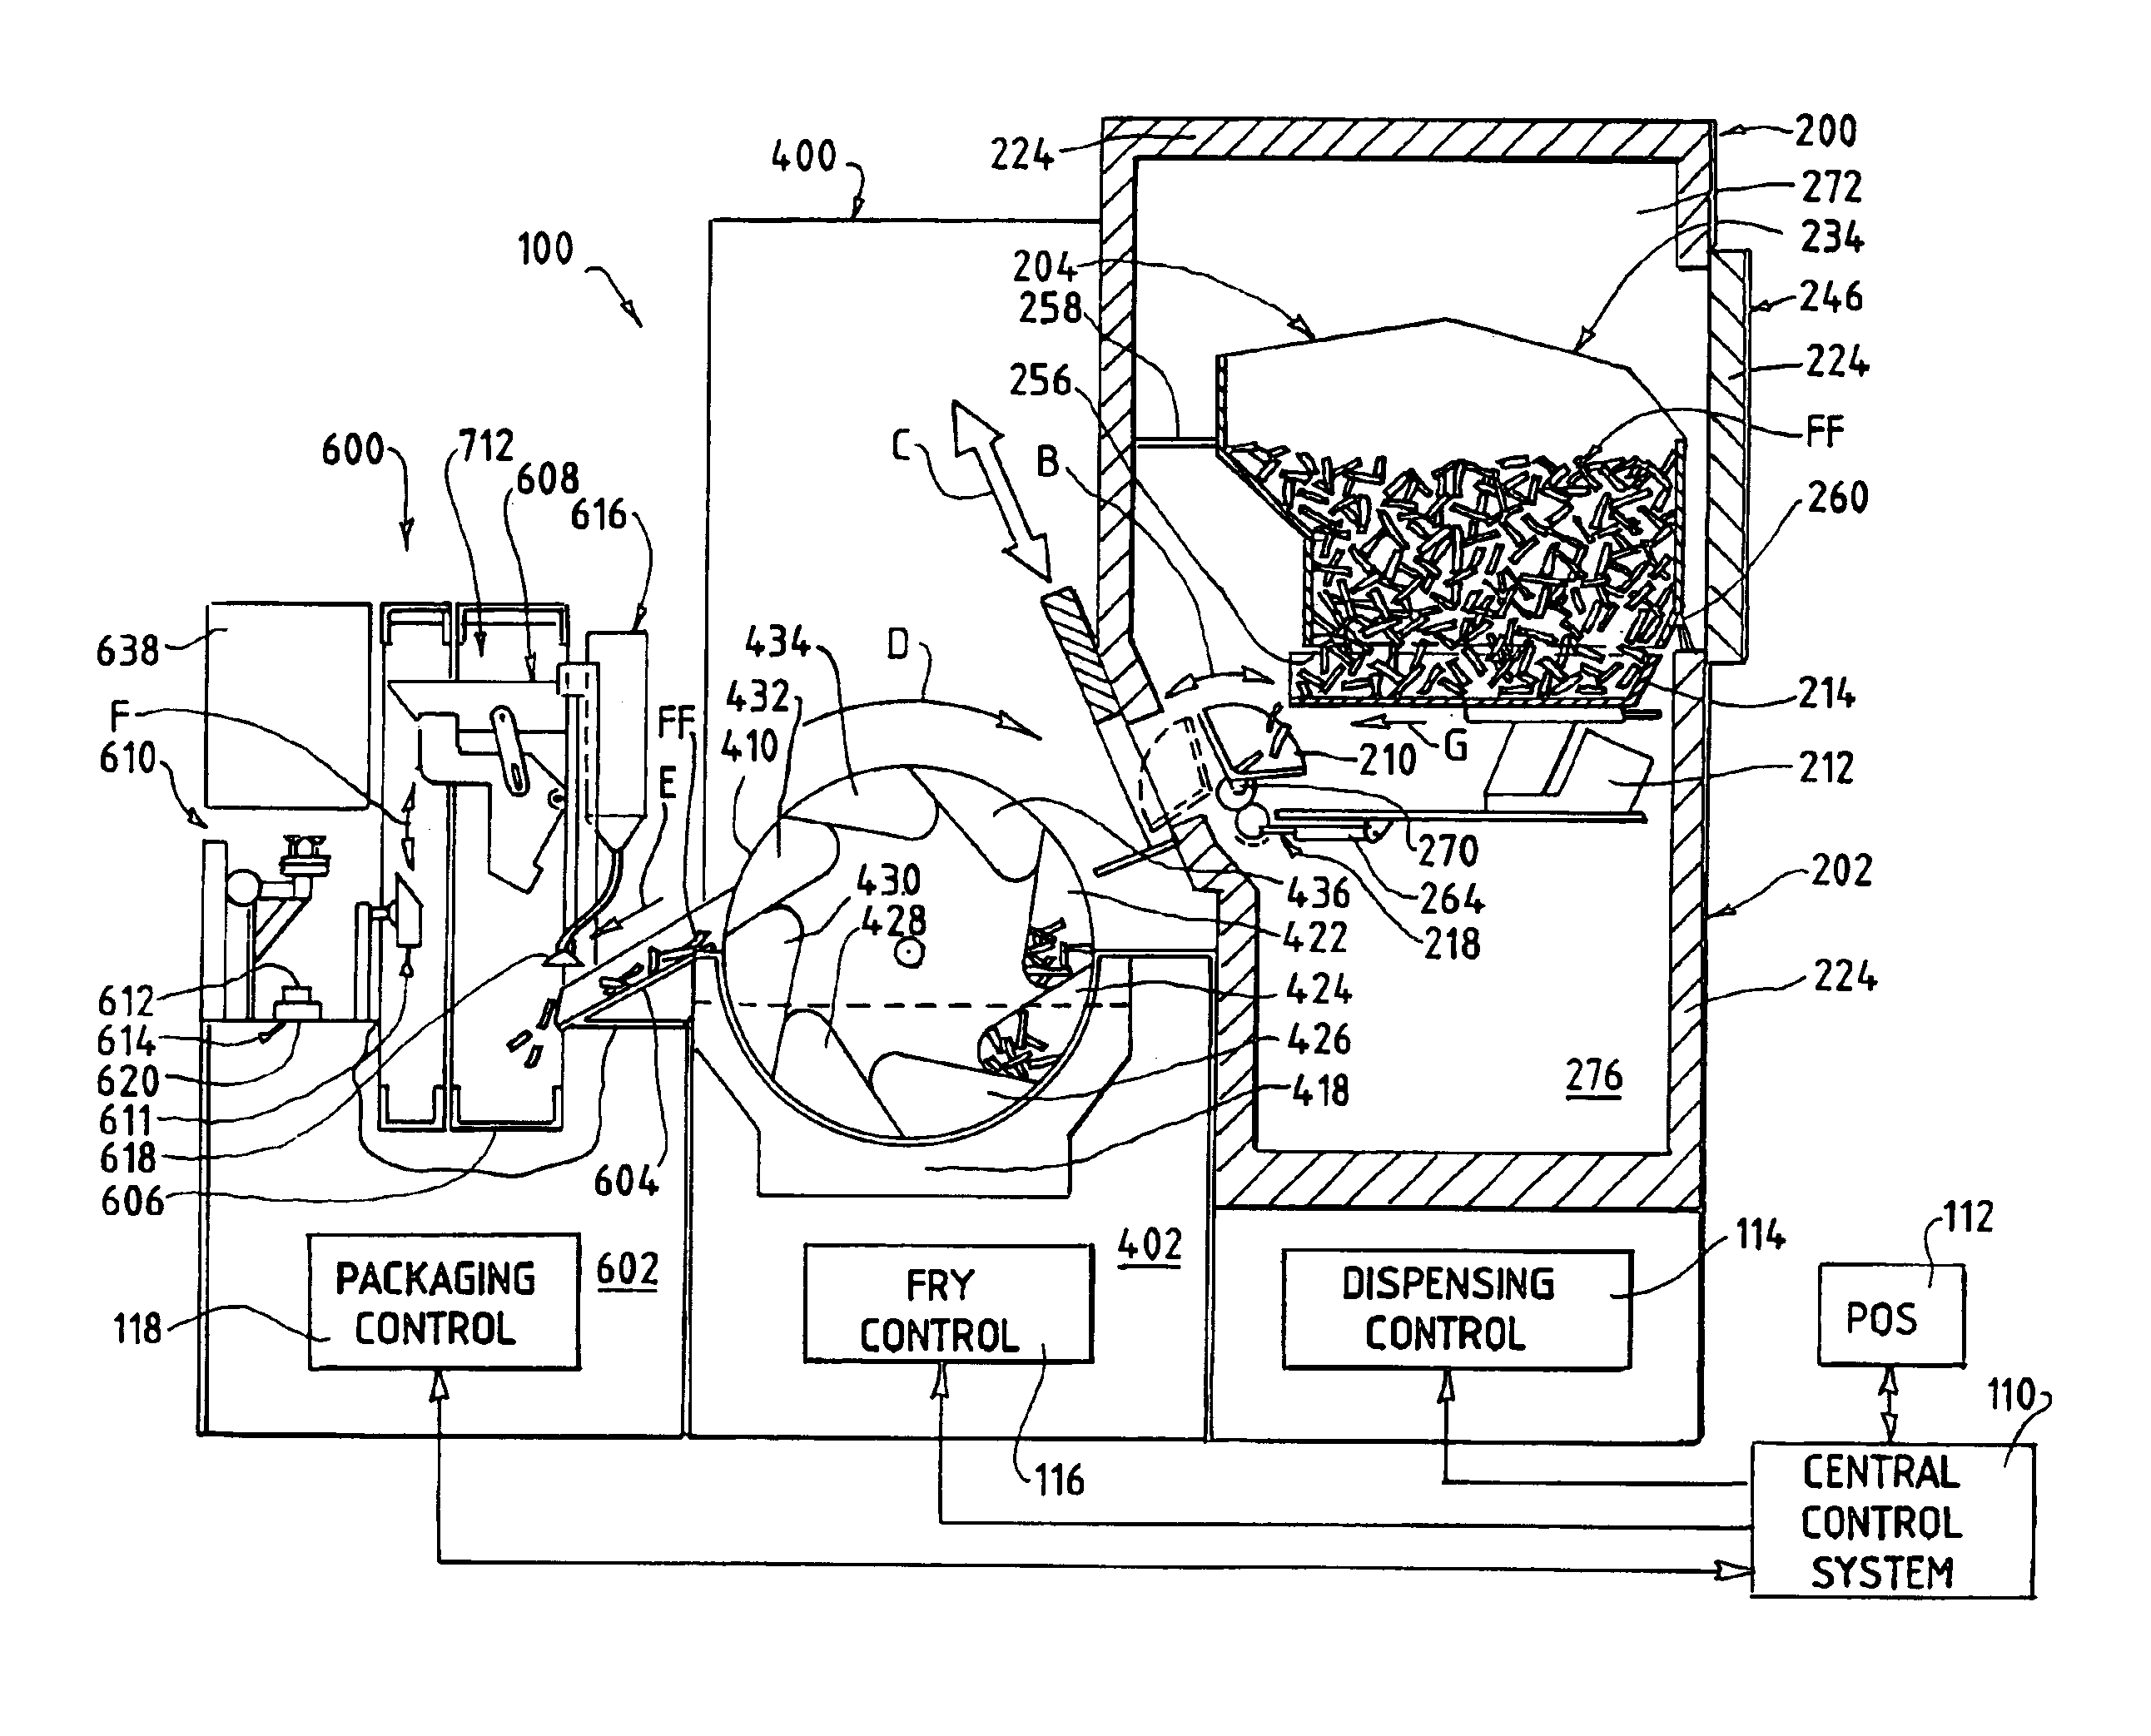 Automated device and method for packaging food